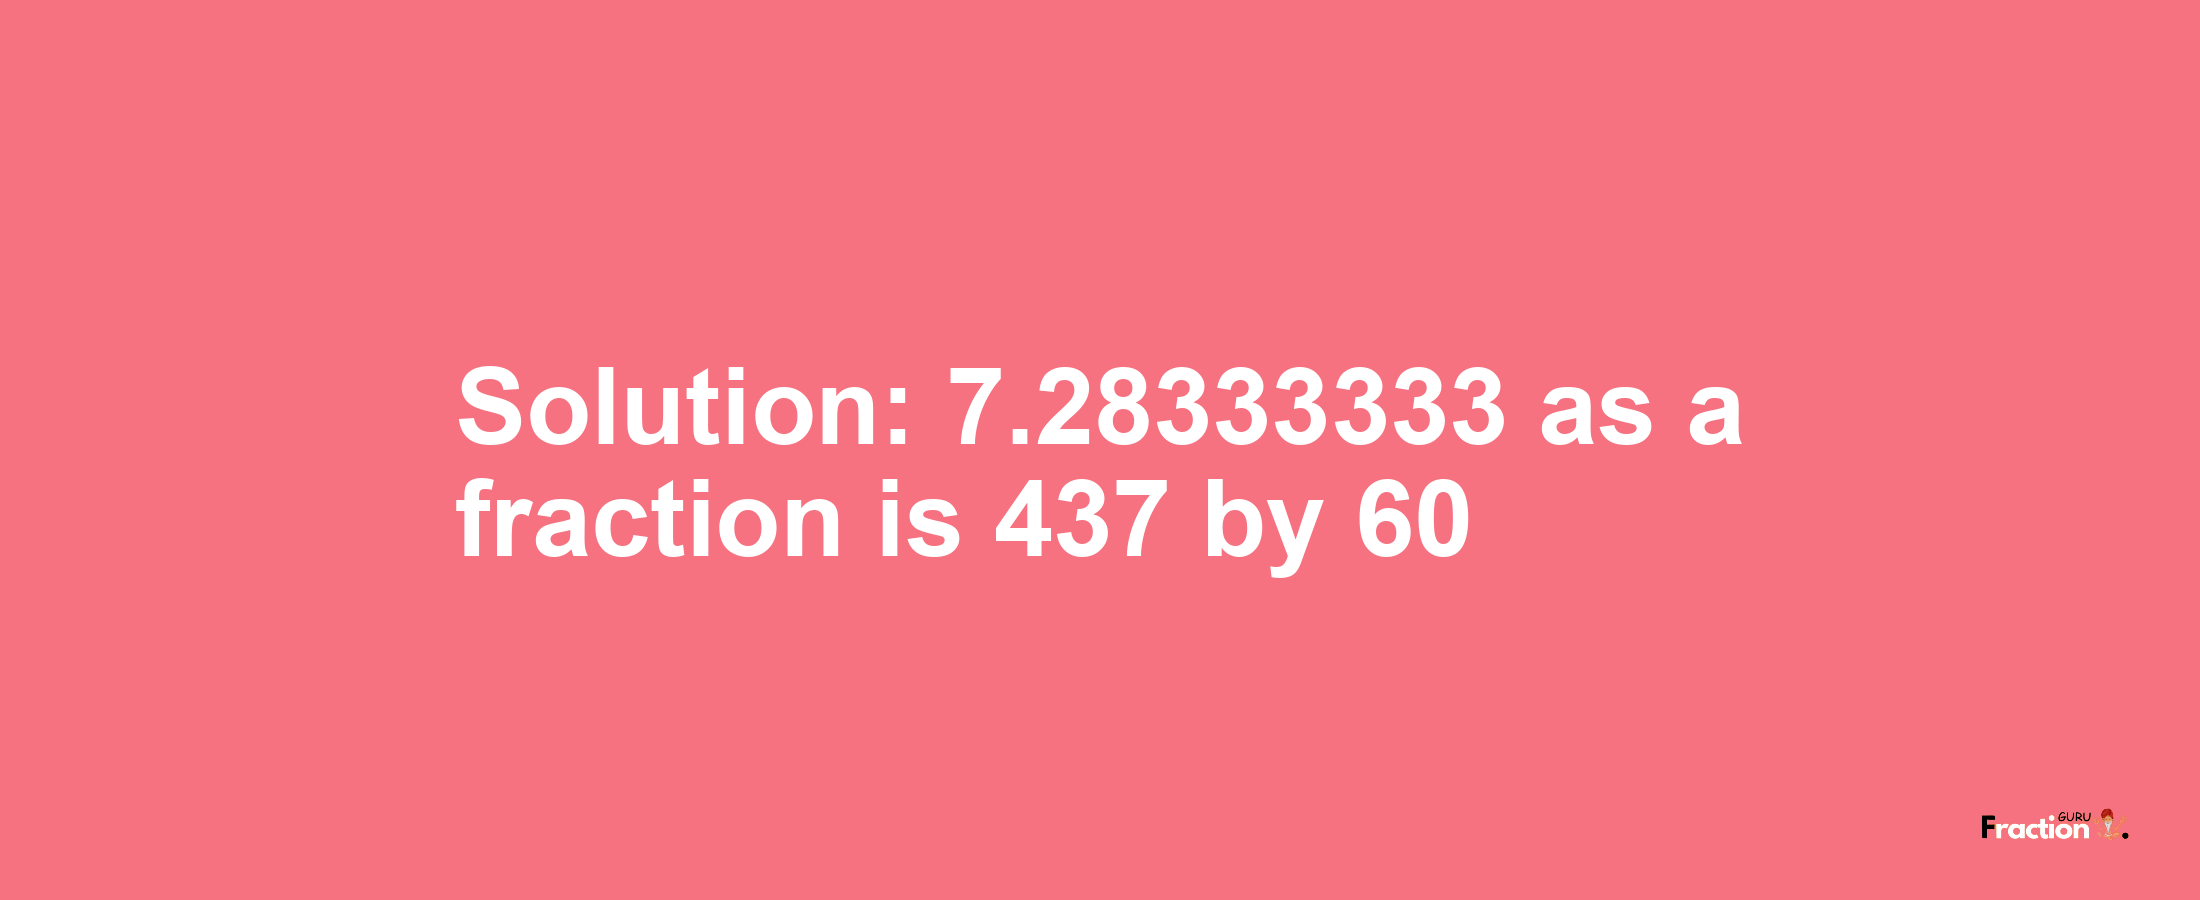 Solution:7.28333333 as a fraction is 437/60